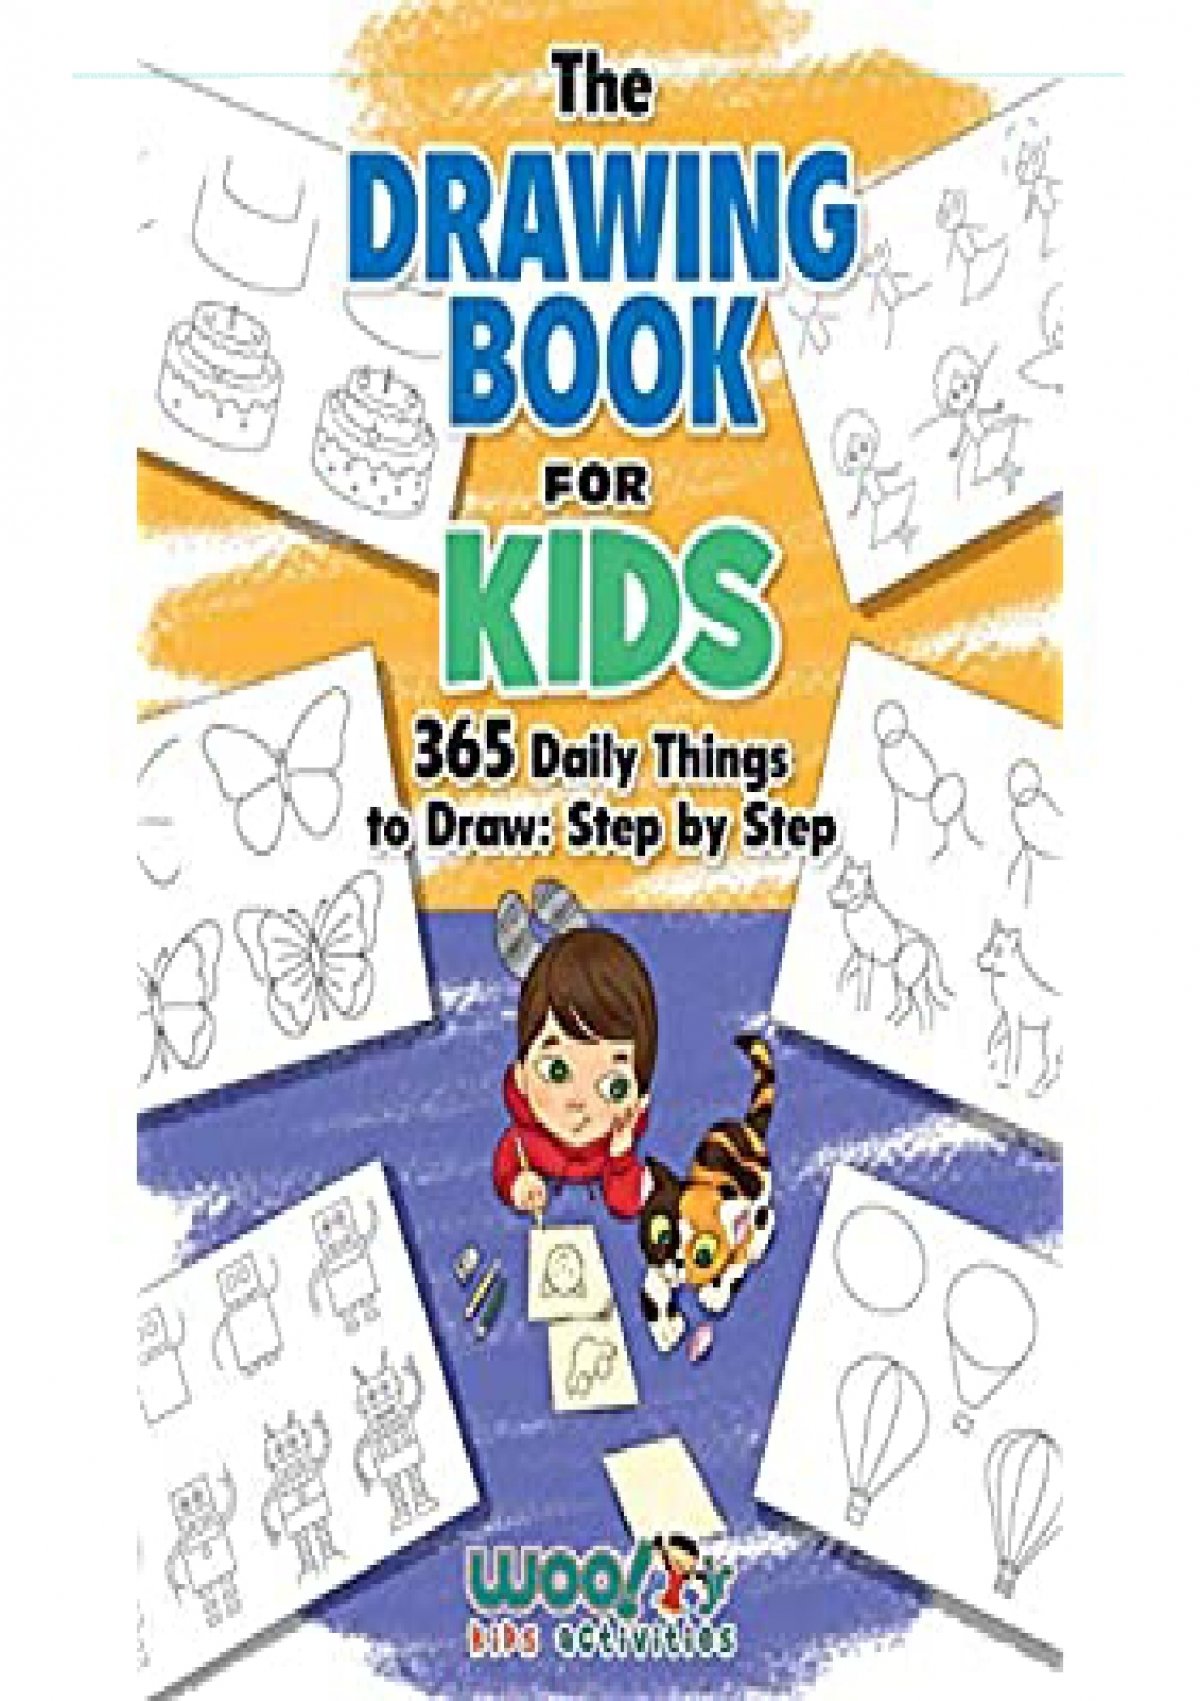 PDF The Drawing Book for Kids: 365 Daily Things to Draw, Step by Step